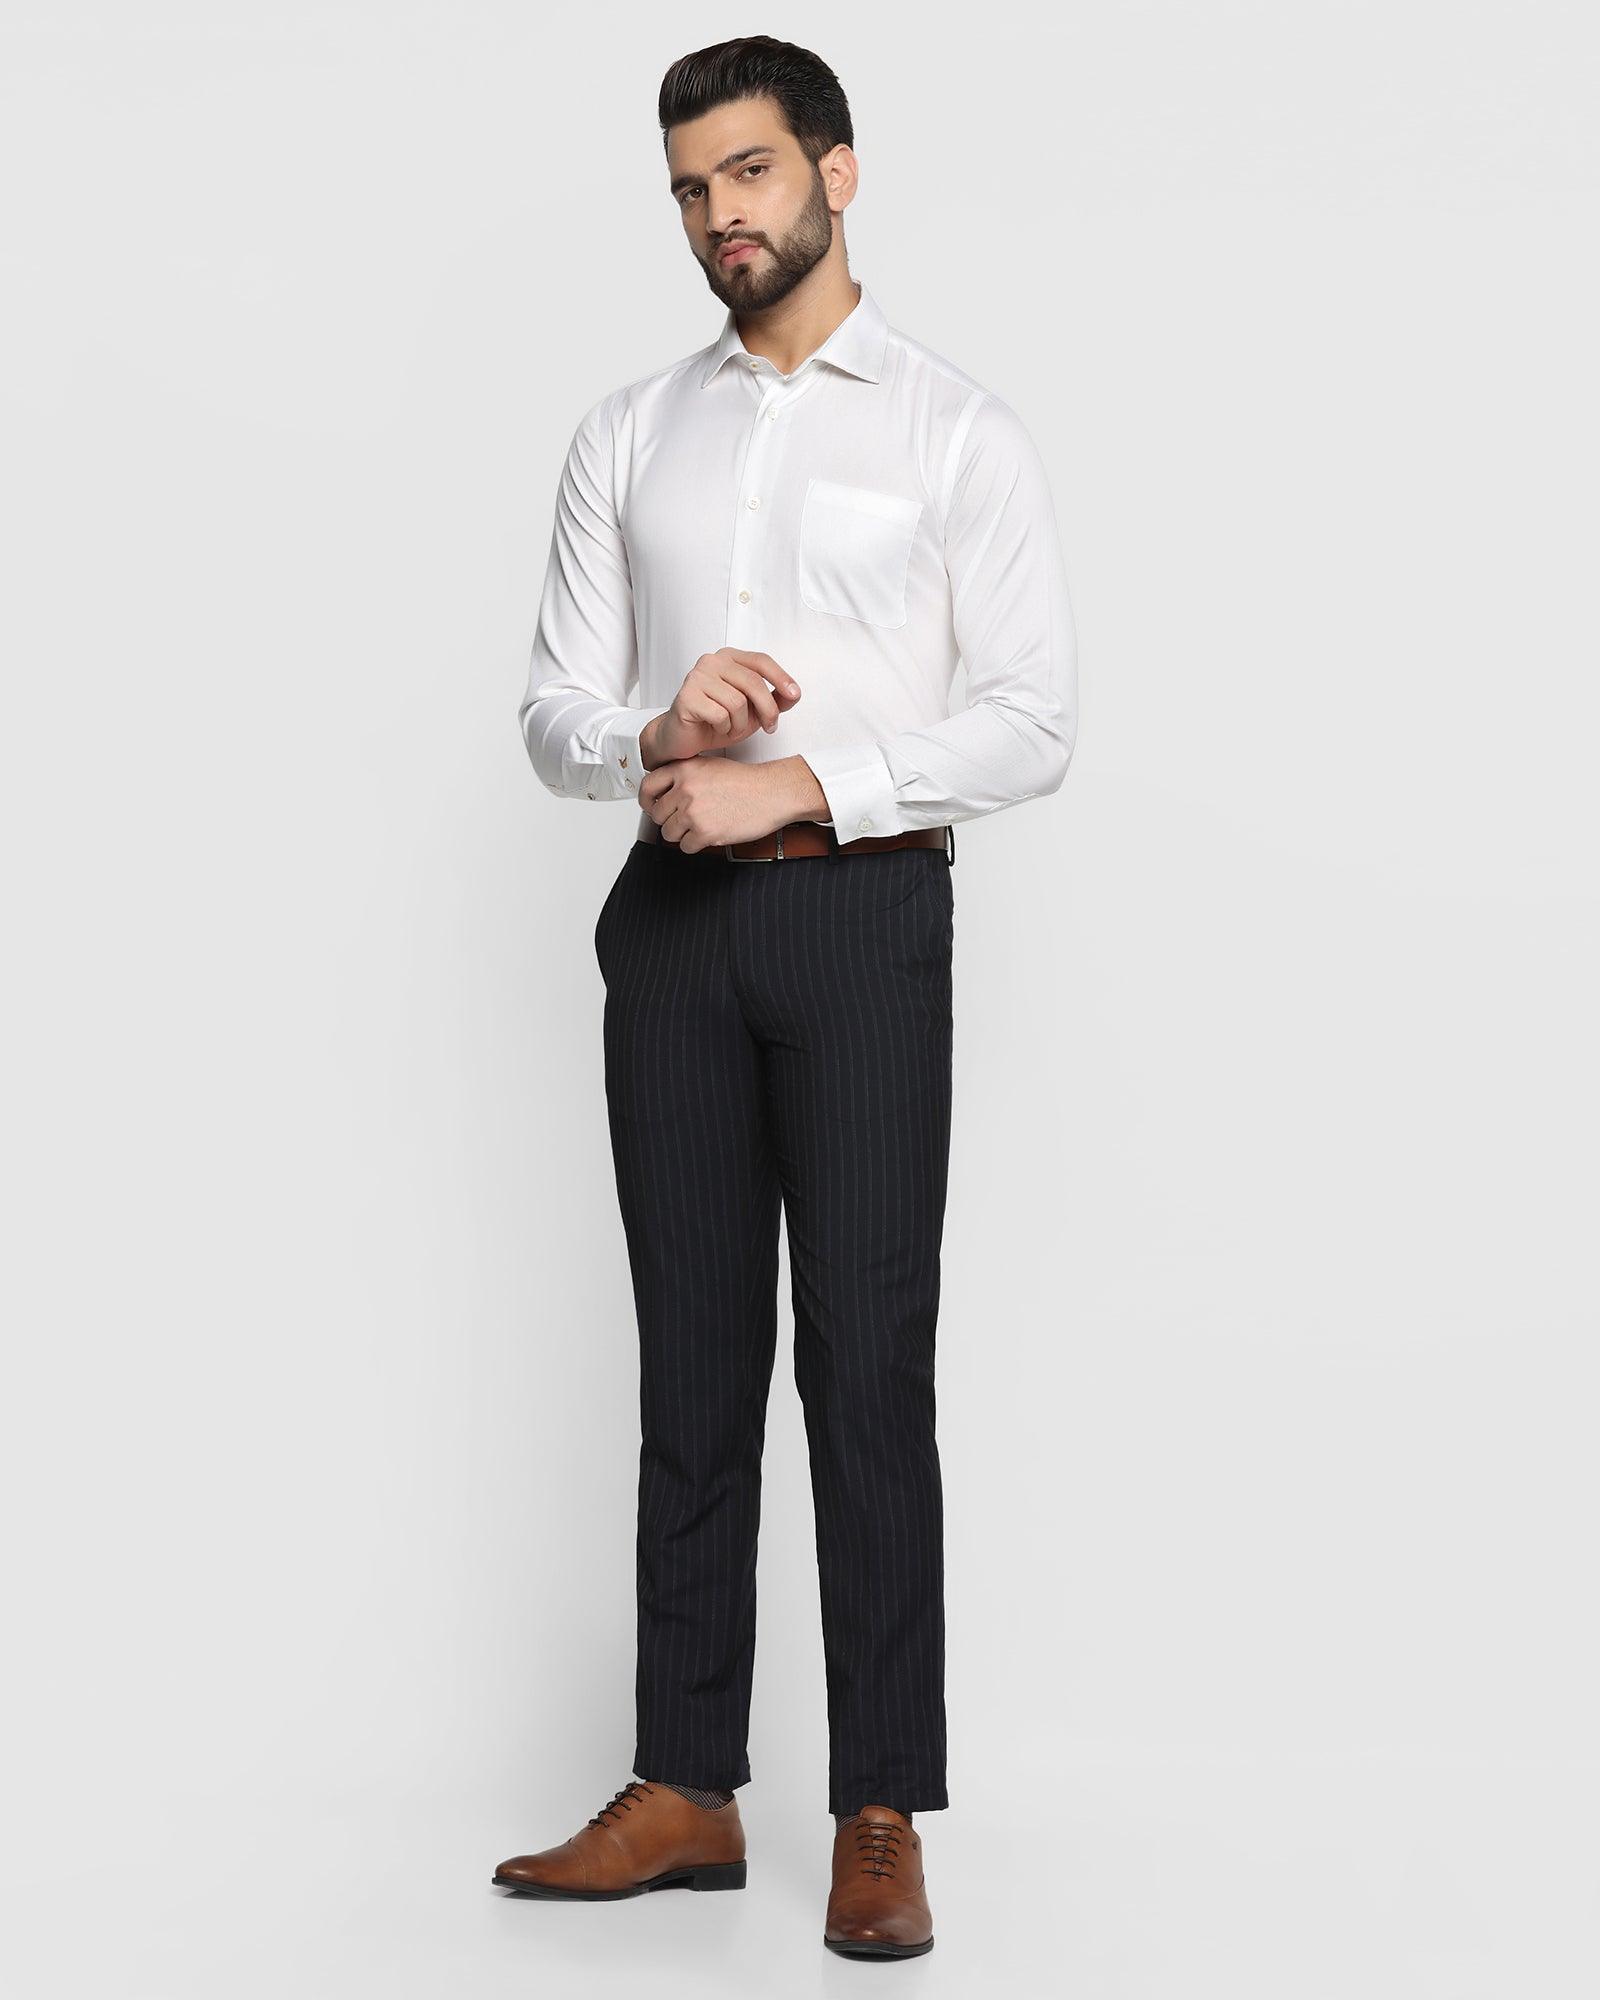 Black Long Sleeve Shirt with White Dress Pants Outfits For Men (3 ideas &  outfits) | Lookastic